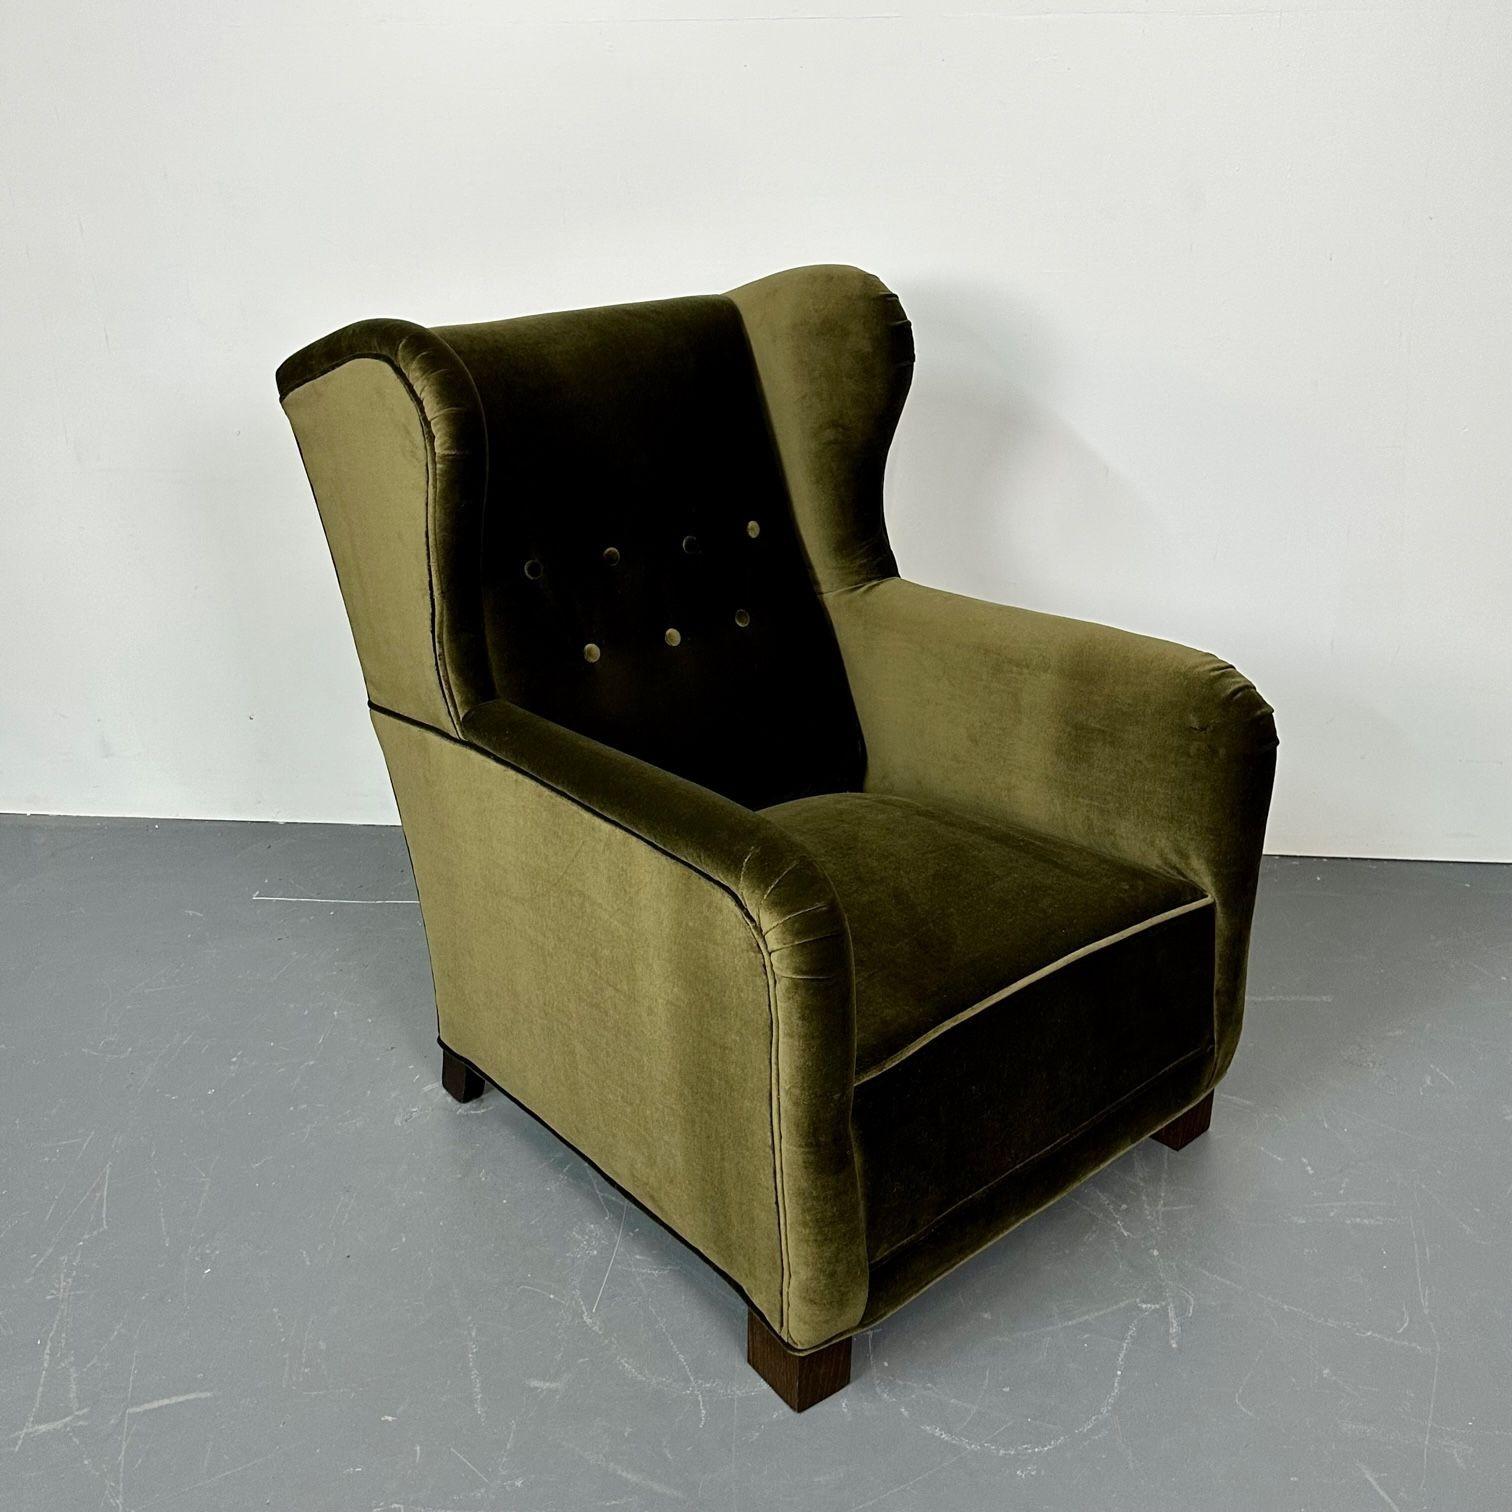 Danish Cabinetmaker Wingback / Lounge Chair, Scroll Arm, Flemming Lassen Style
Chic mid-century wingback lounge or arm chair designed and produced in Denmark, circa 1950s. Newly upholstered in a luxurious green velvet fabric. Compatible chair